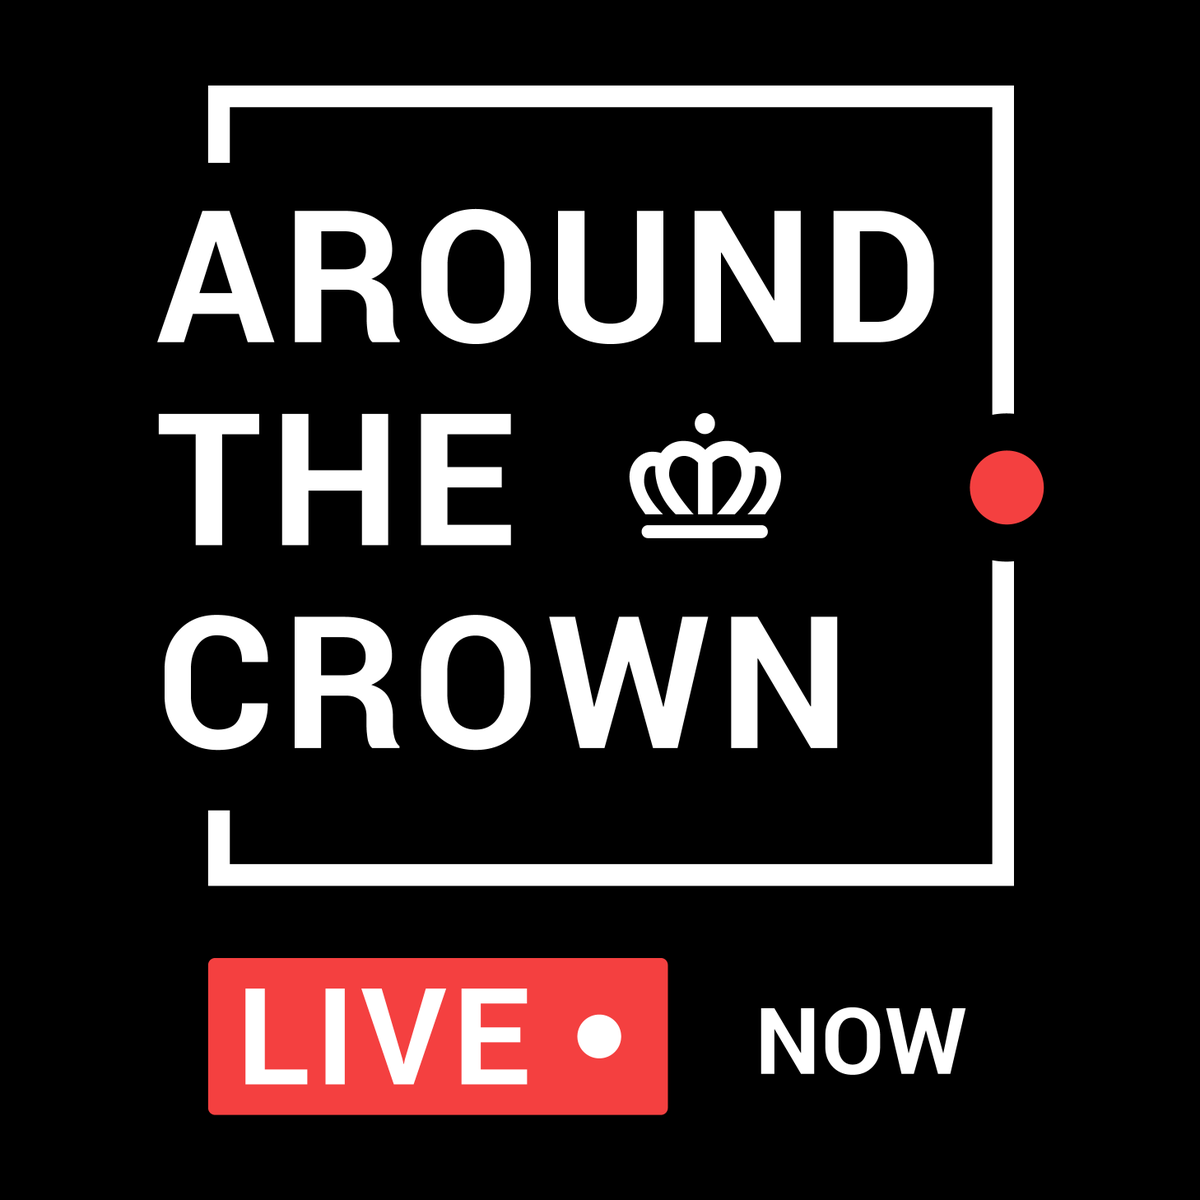 Tune in to Around the Crown every Tuesday at 1 p.m. on Facebook Live. On February 13, we talk to #CLTCC members @DrJustinHarlow (District 2) and @Larken (District 1). Tune in and send us questions for your representatives. Previous episodes ➡️ goo.gl/6t1A9q